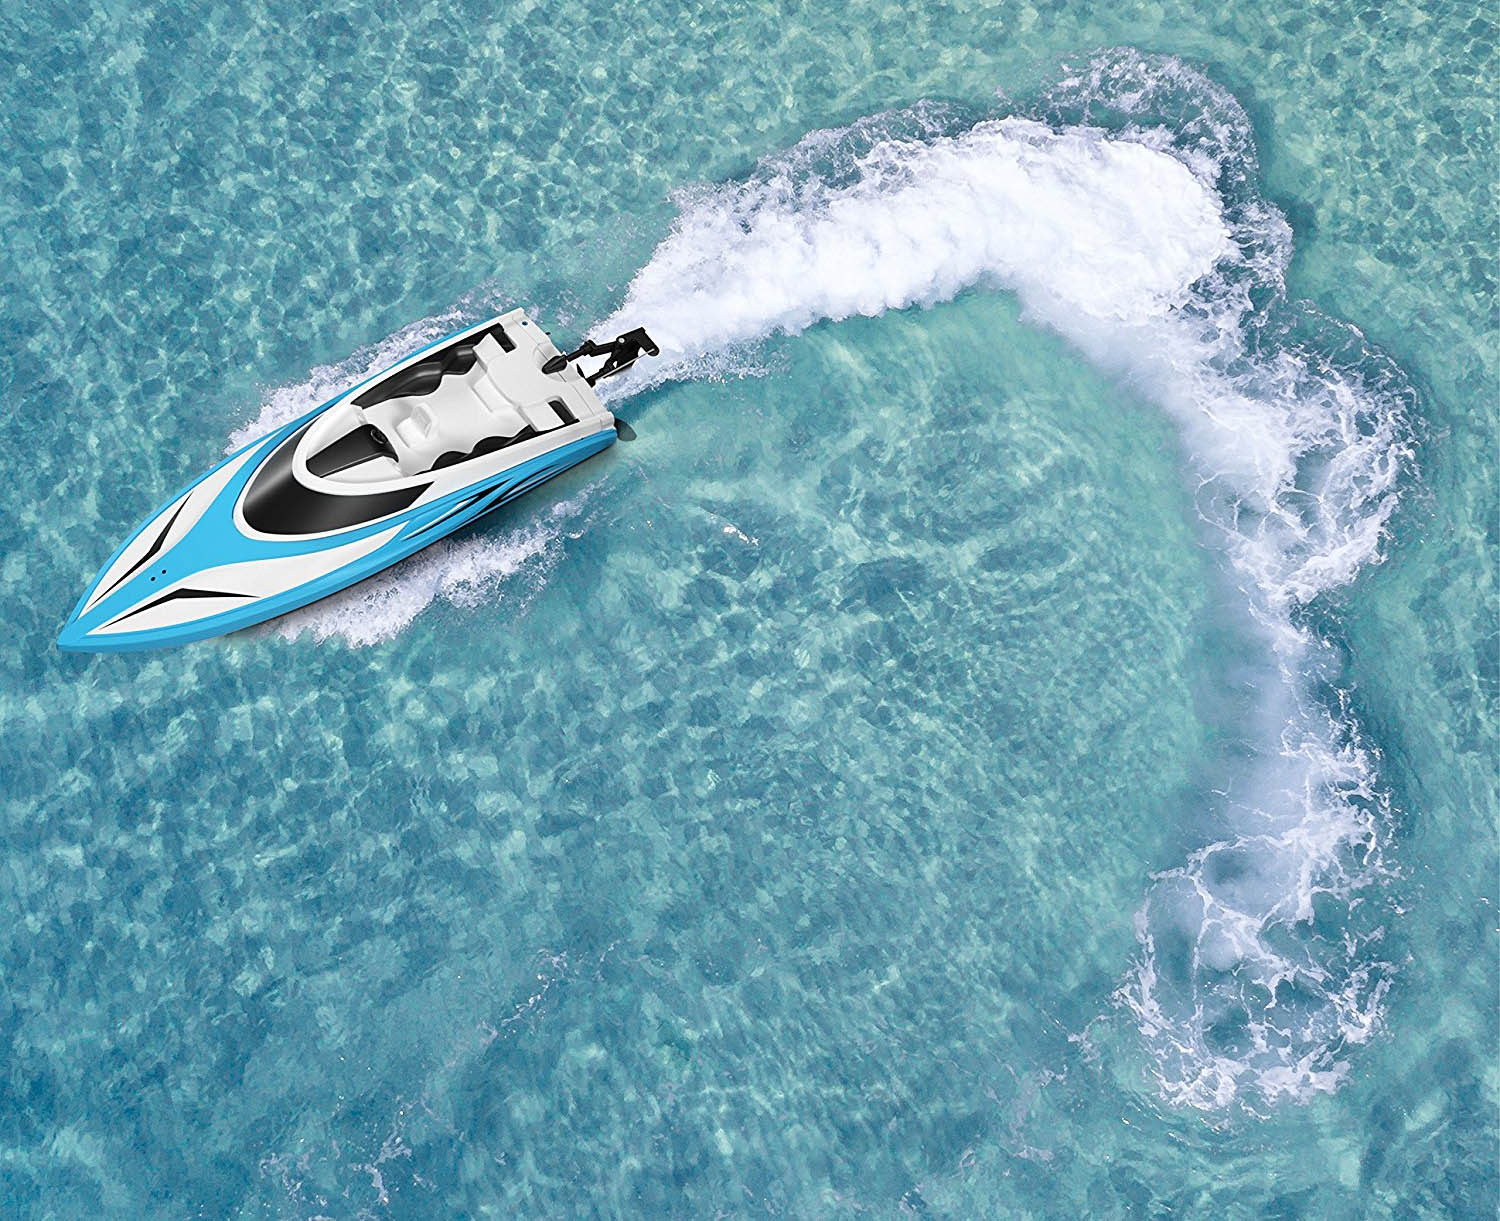 You can buy a boat! A badass, REMOTE CONTROL boat.<br><br>Become a sea captain from the shore with an RC pool toy you can buy <a href=https://amzn.to/2ORuCSW "nofollow" target="_blank">here</a>.